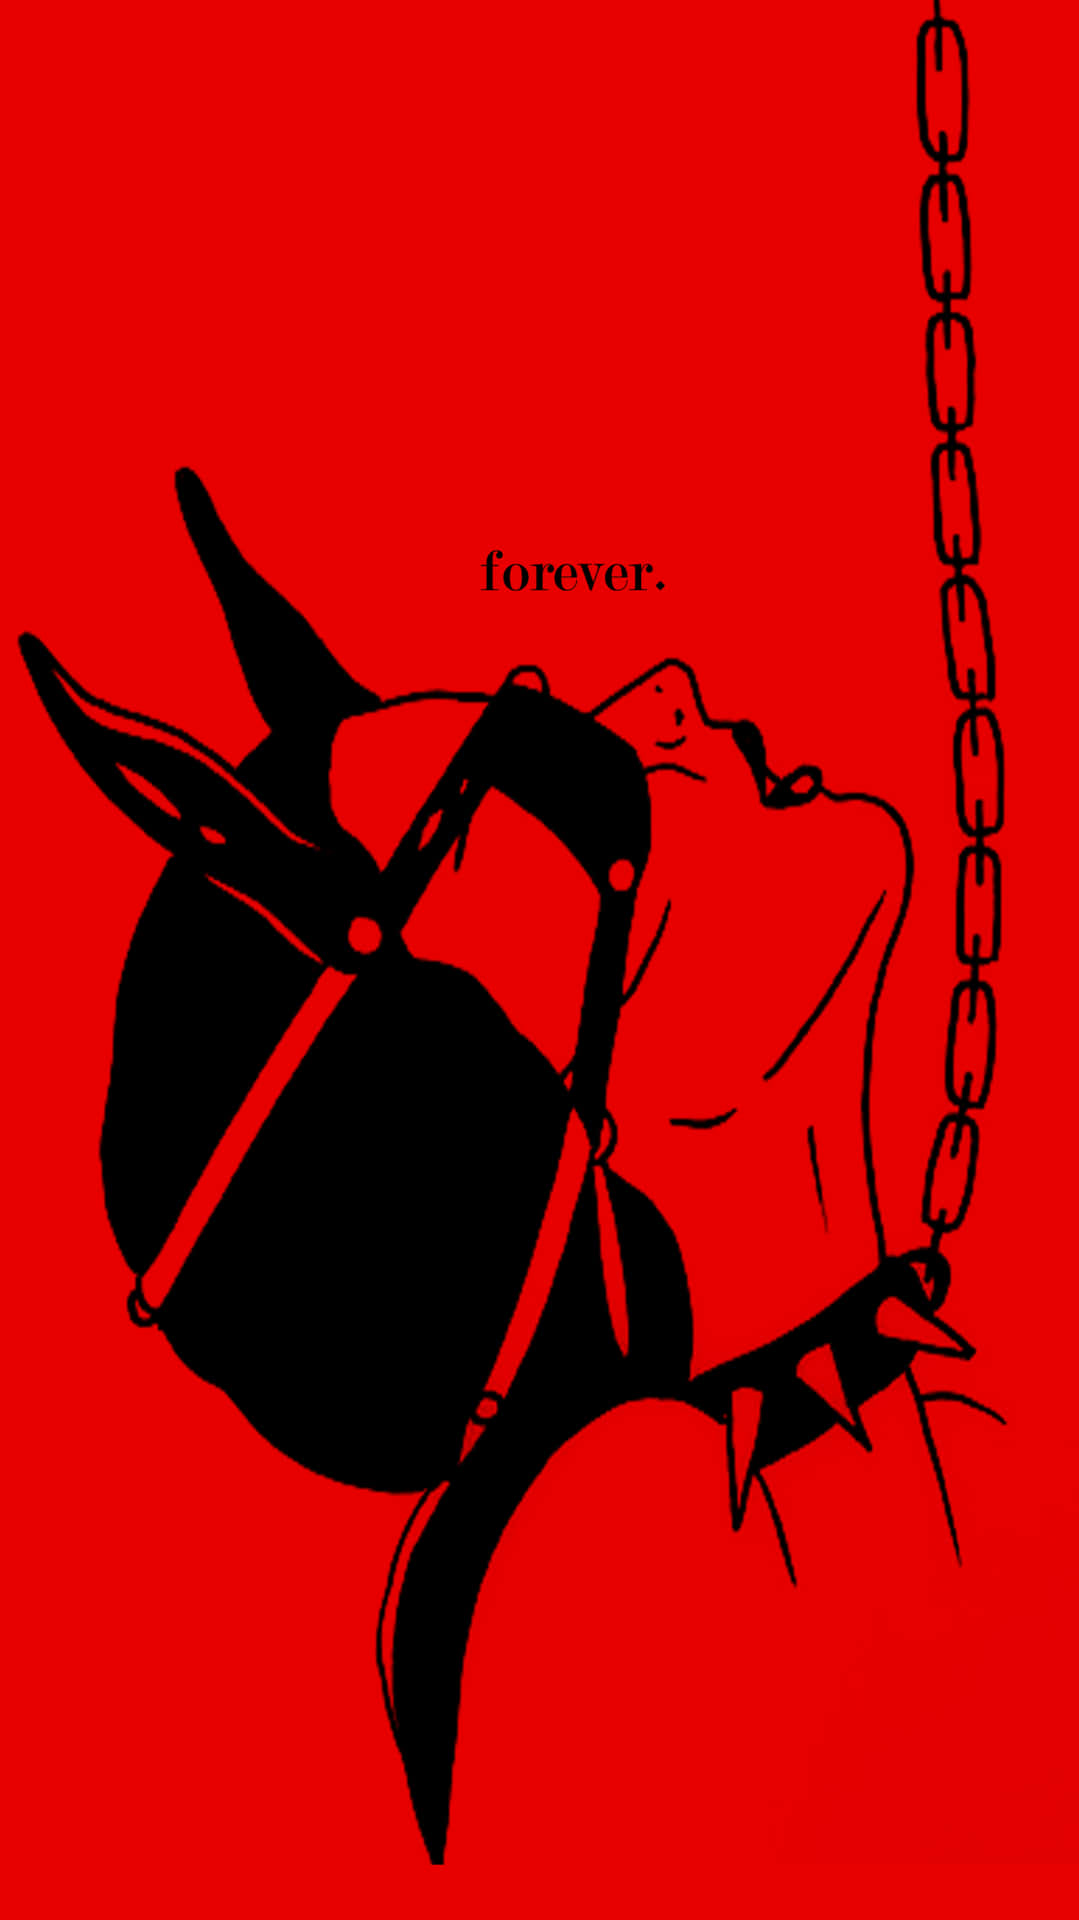 A Woman Is Chained To A Red Background